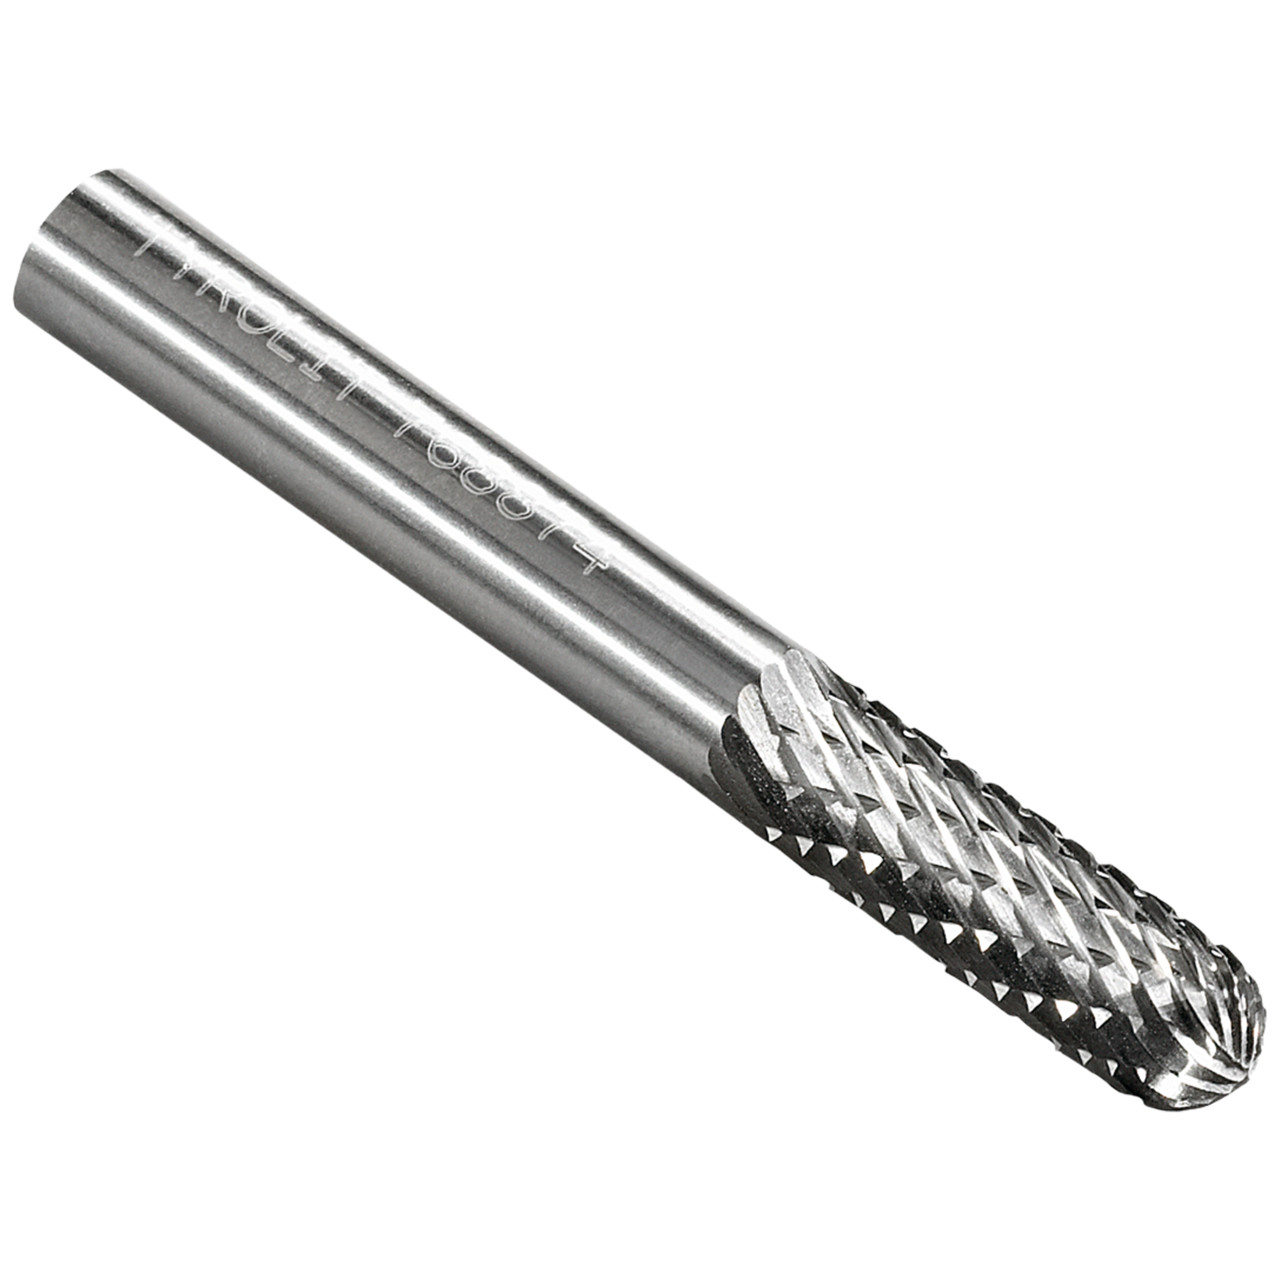 TYROLIT carbide end mill DxT-SxL 6x19-6x50 For cast iron, steel and stainless steel, shape: 52WRC - cylindrical, Art. 768874